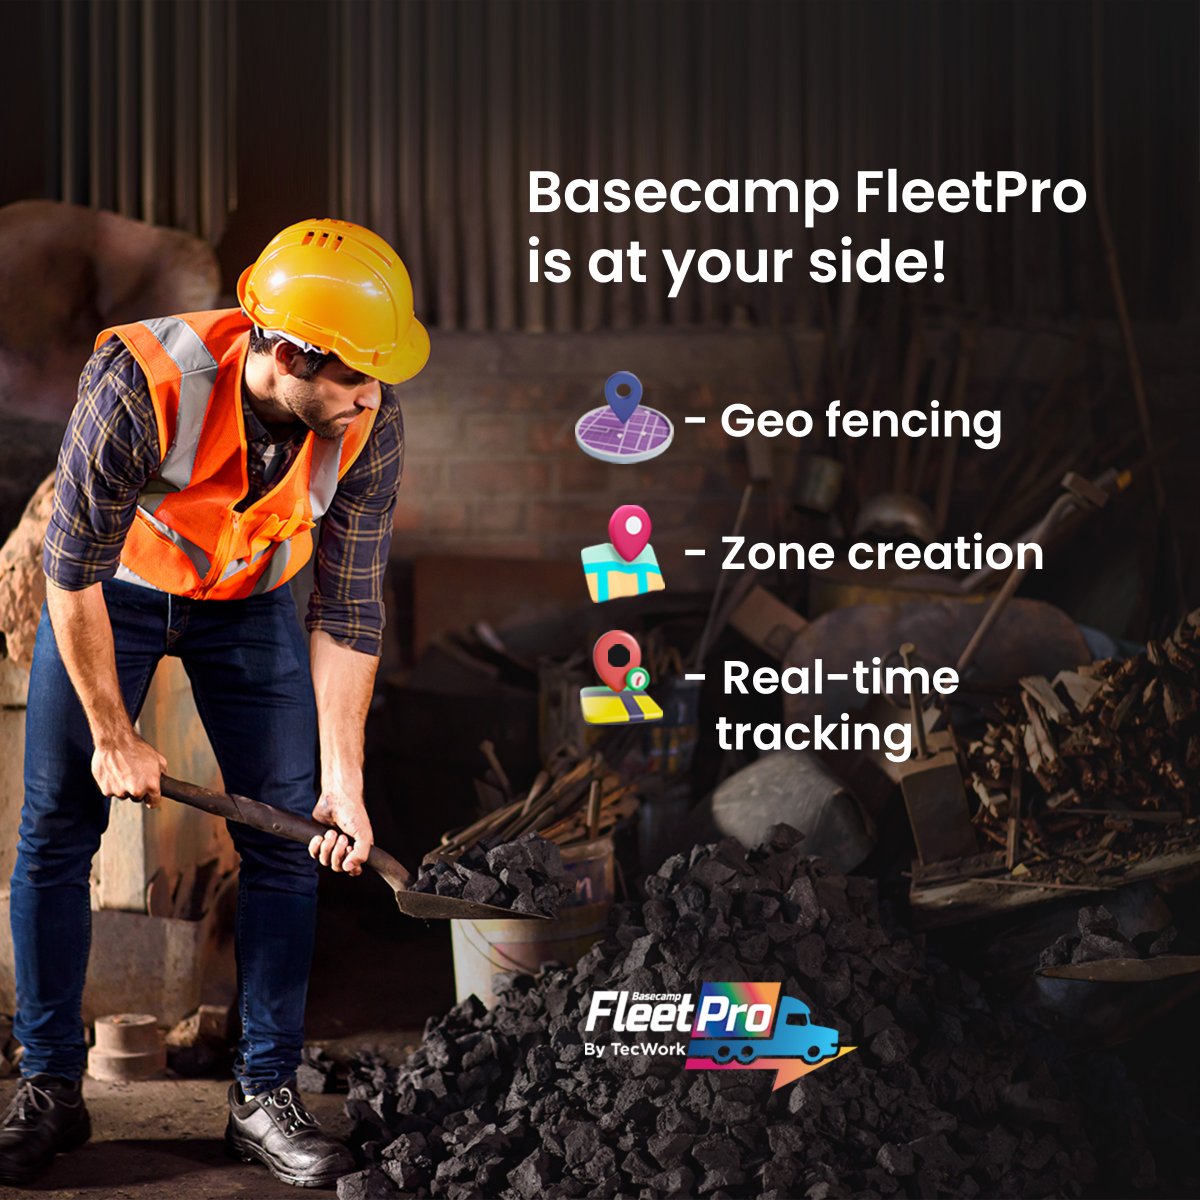 Get exact location of your workers employed in risky jobs and assure their wellbeing with Basecamp FleetPro. Because, every life matters! bit.ly/oil-and-gas-in…

#fleetmanagement #fleetsoftware #gpstracking #vehicletracking #technology